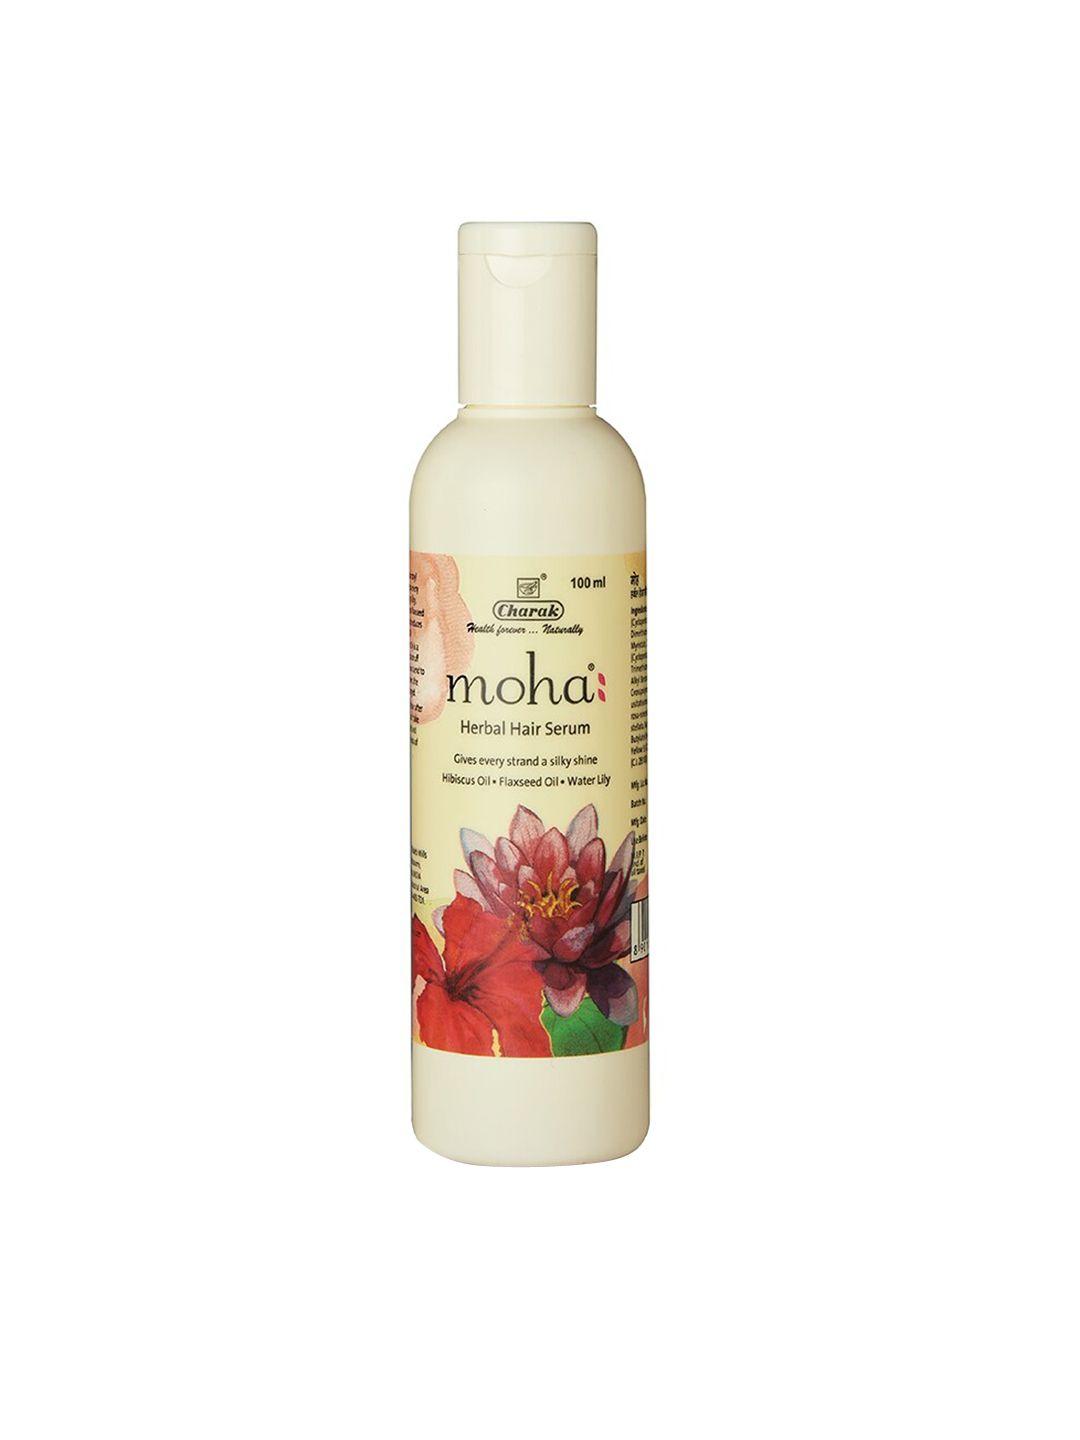 moha herbal hair serum with hibiscus oil & flaxseed oil - 100ml